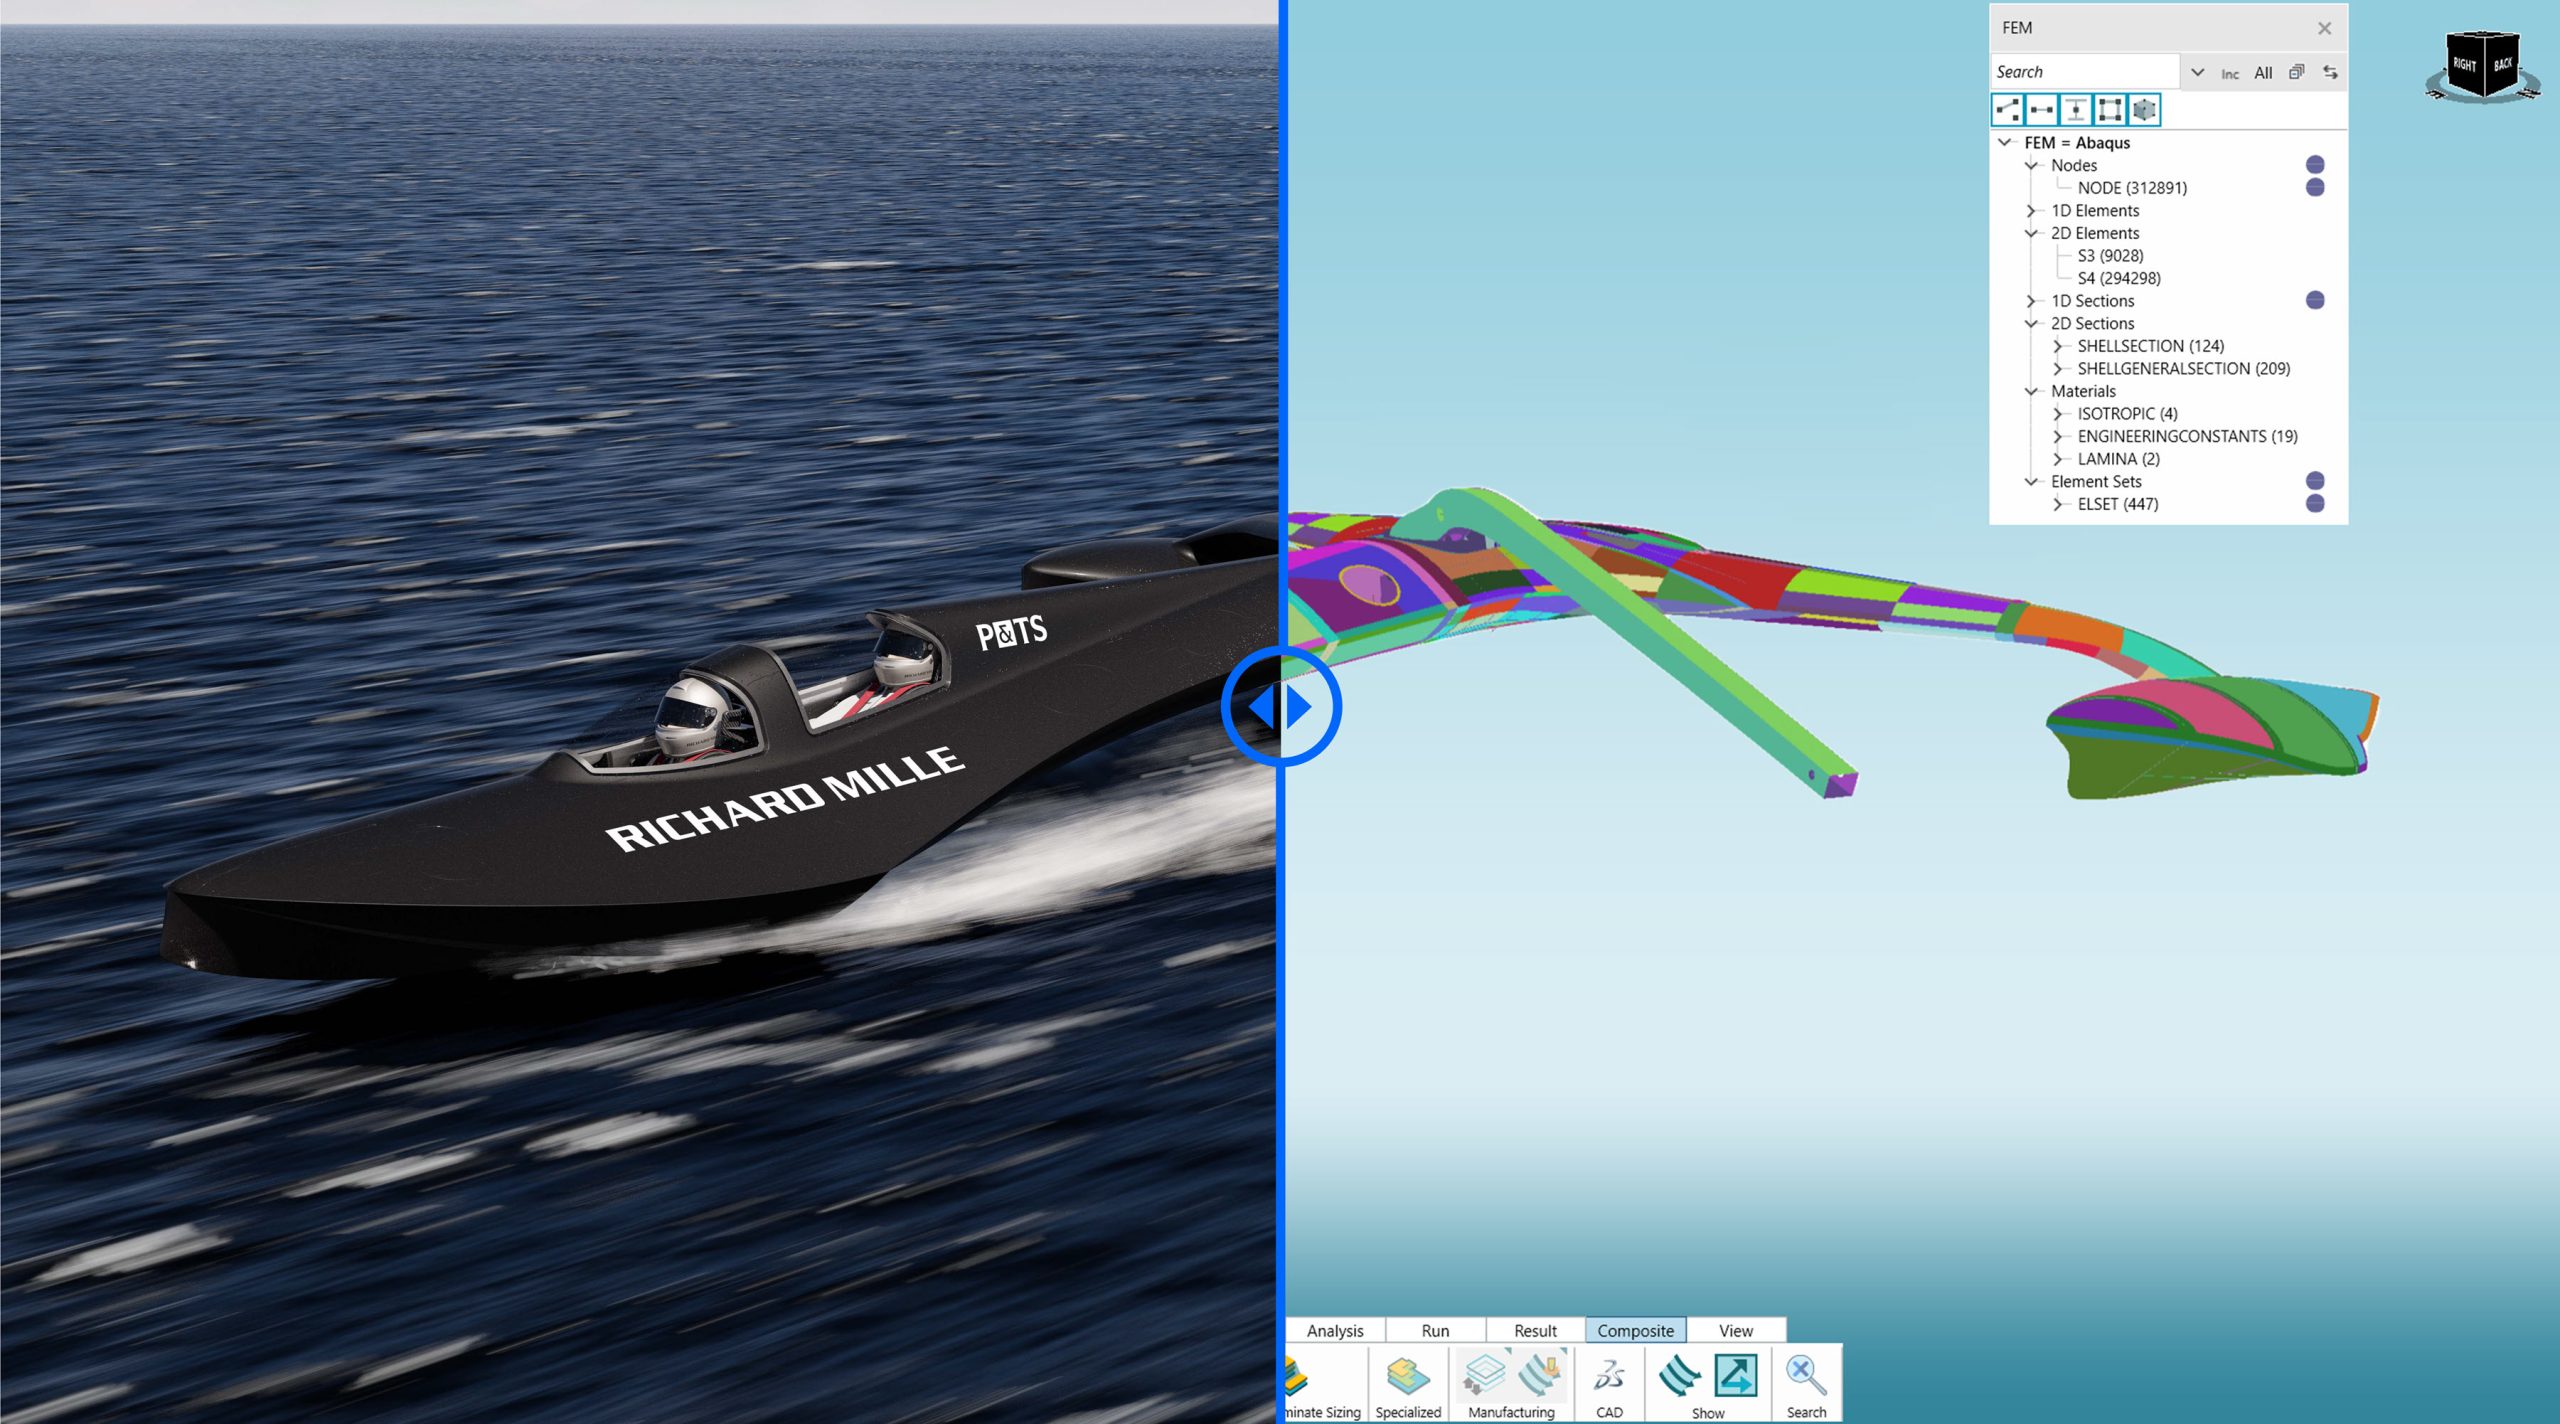 Collier Aerospace to Launch Brand-new Structural Analysis and Design Optimization Software for Composites at JEC World 2022